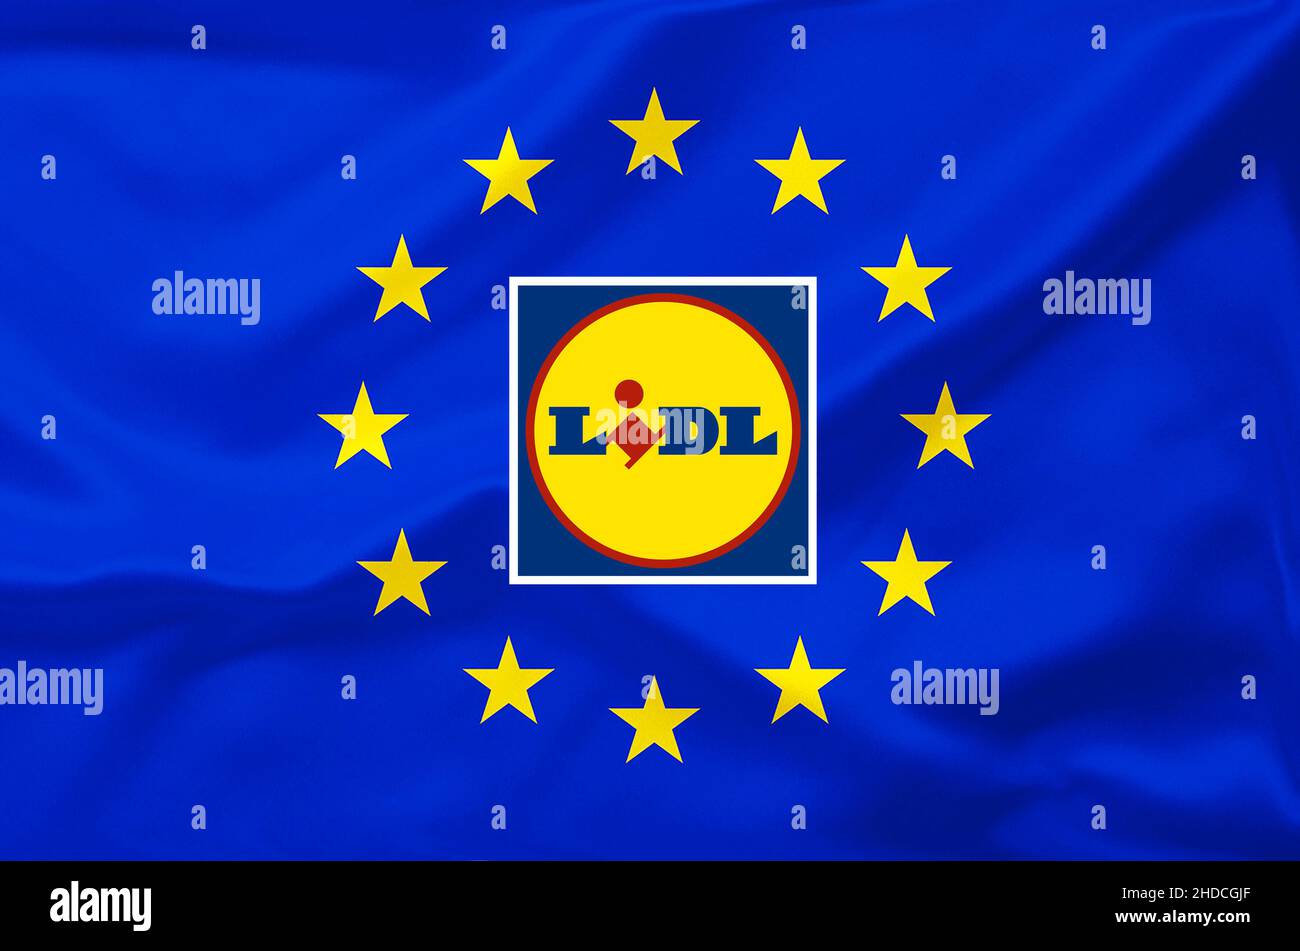 Lidl Online High Resolution Stock Photography and Images - Alamy